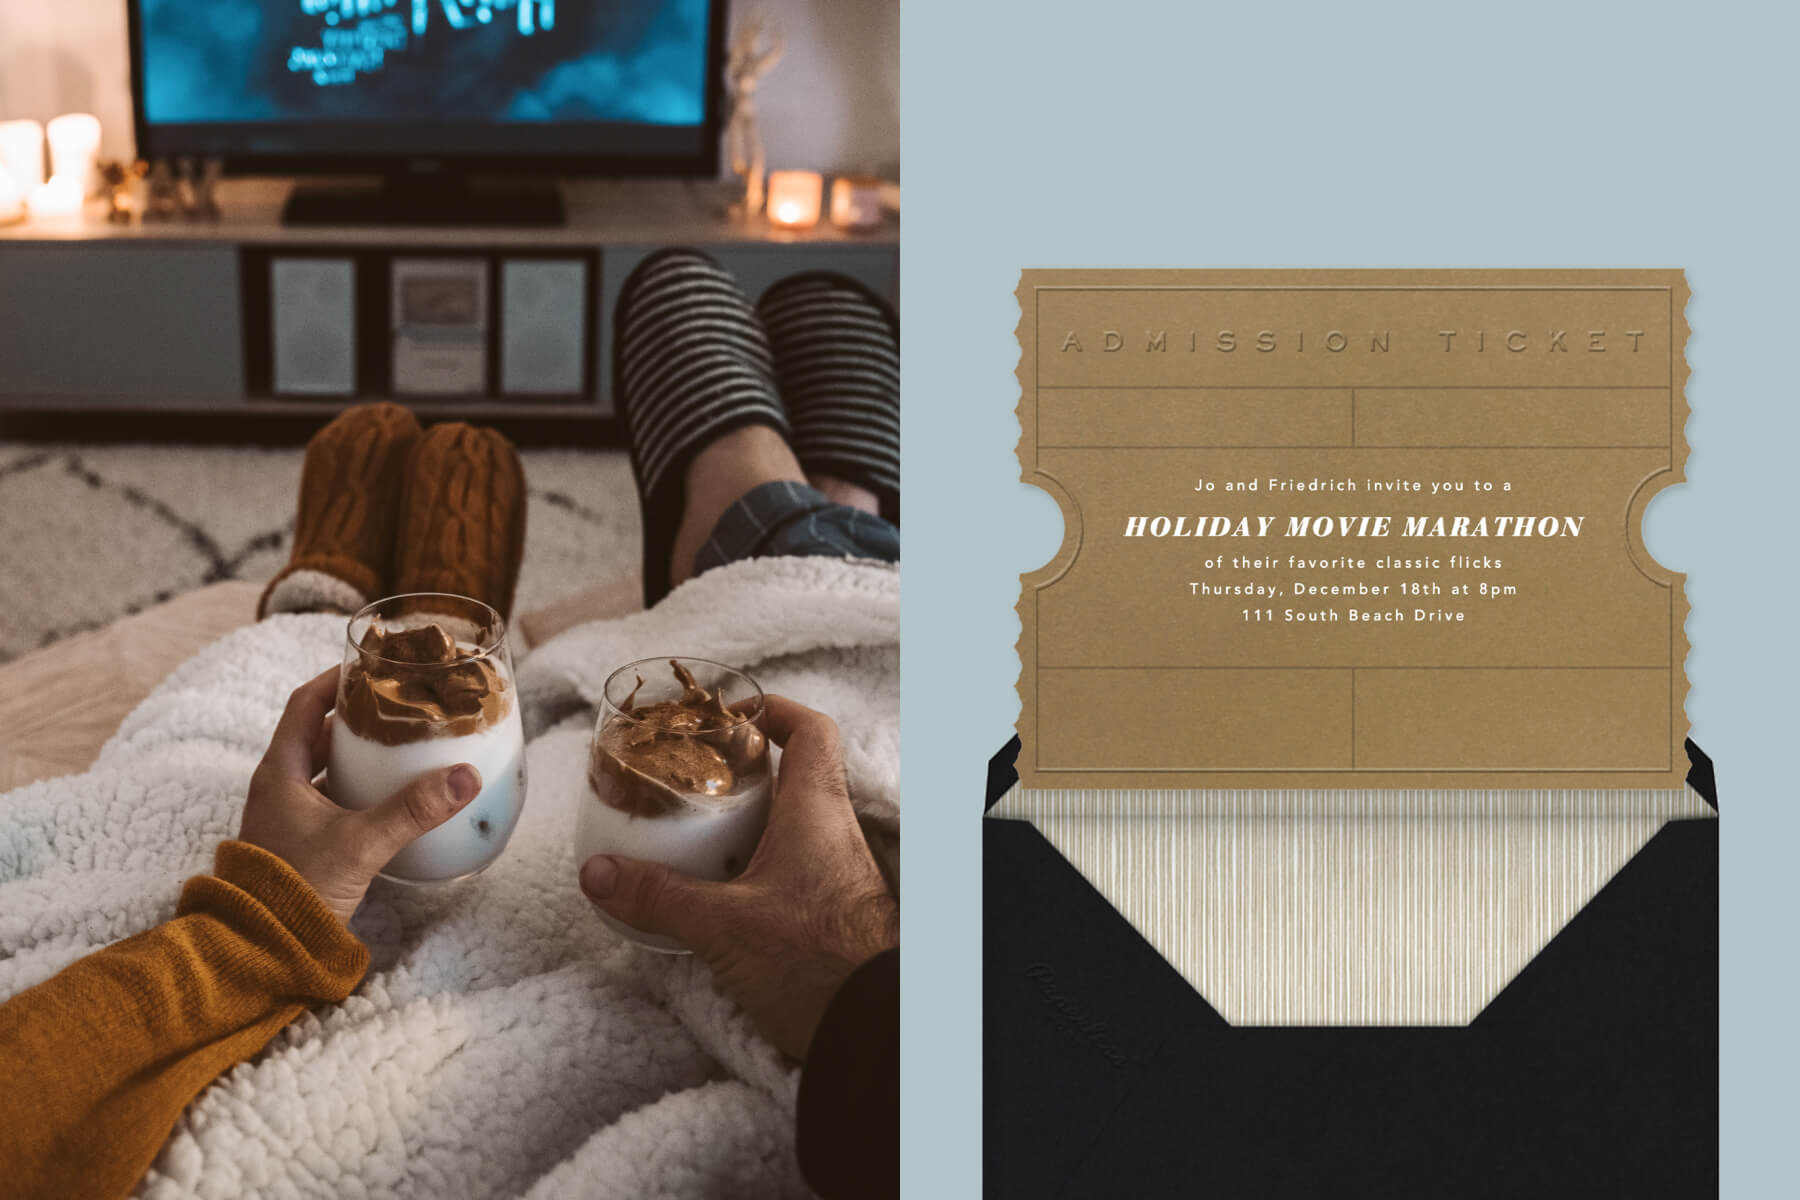 Left: Two people hold cups of dalgona coffee while watching a movie. Right: An invitation shaped like an admission ticket.